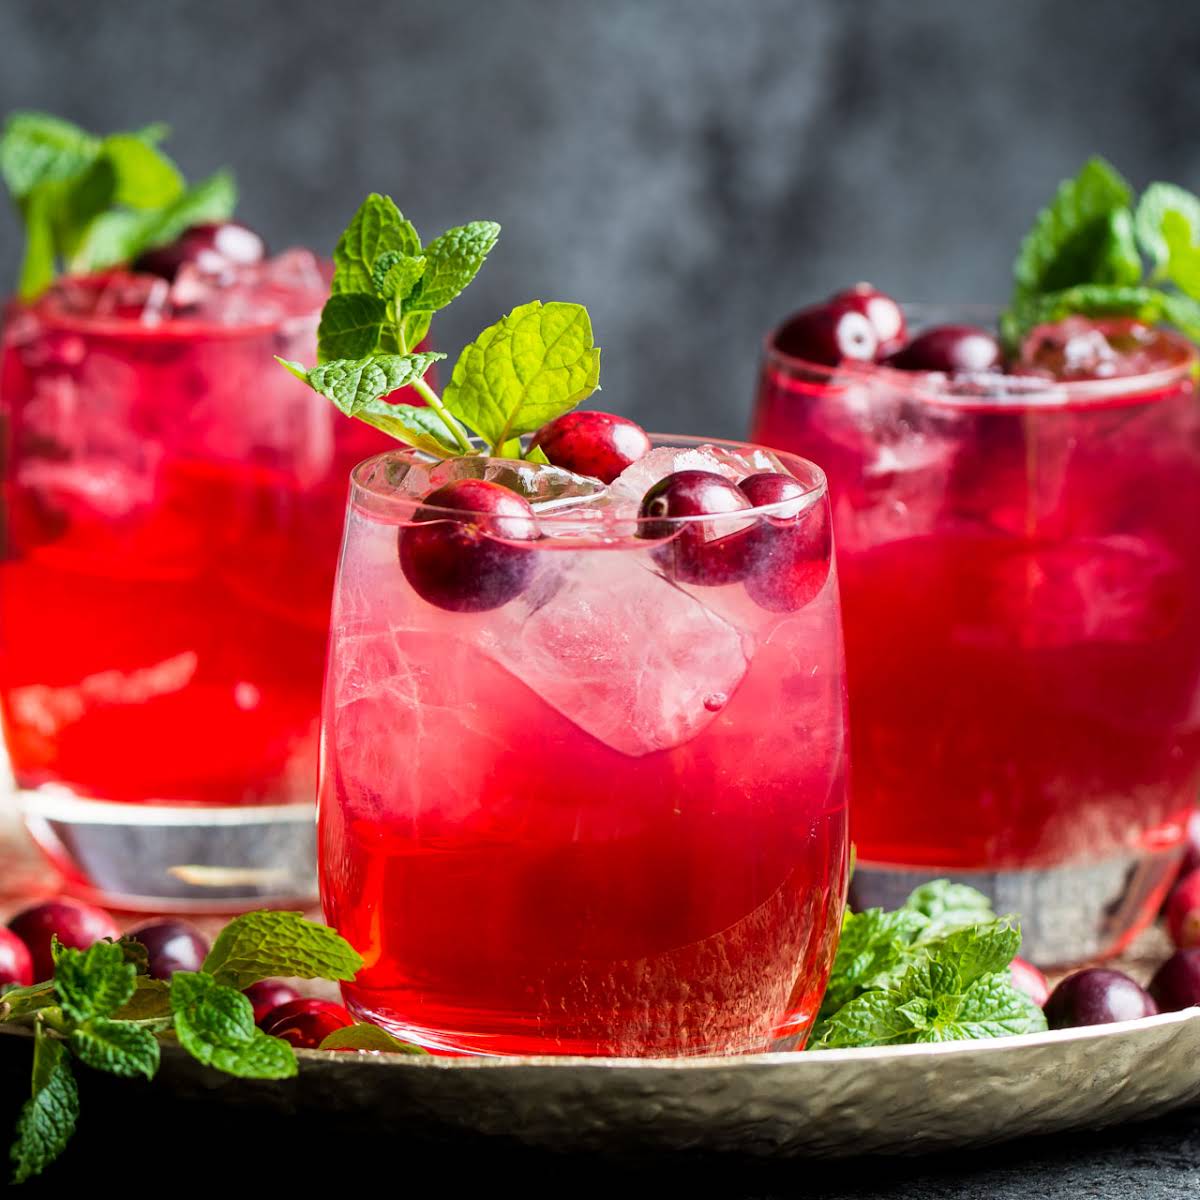 10 Best Cranberry Juice Gin Drink Recipes